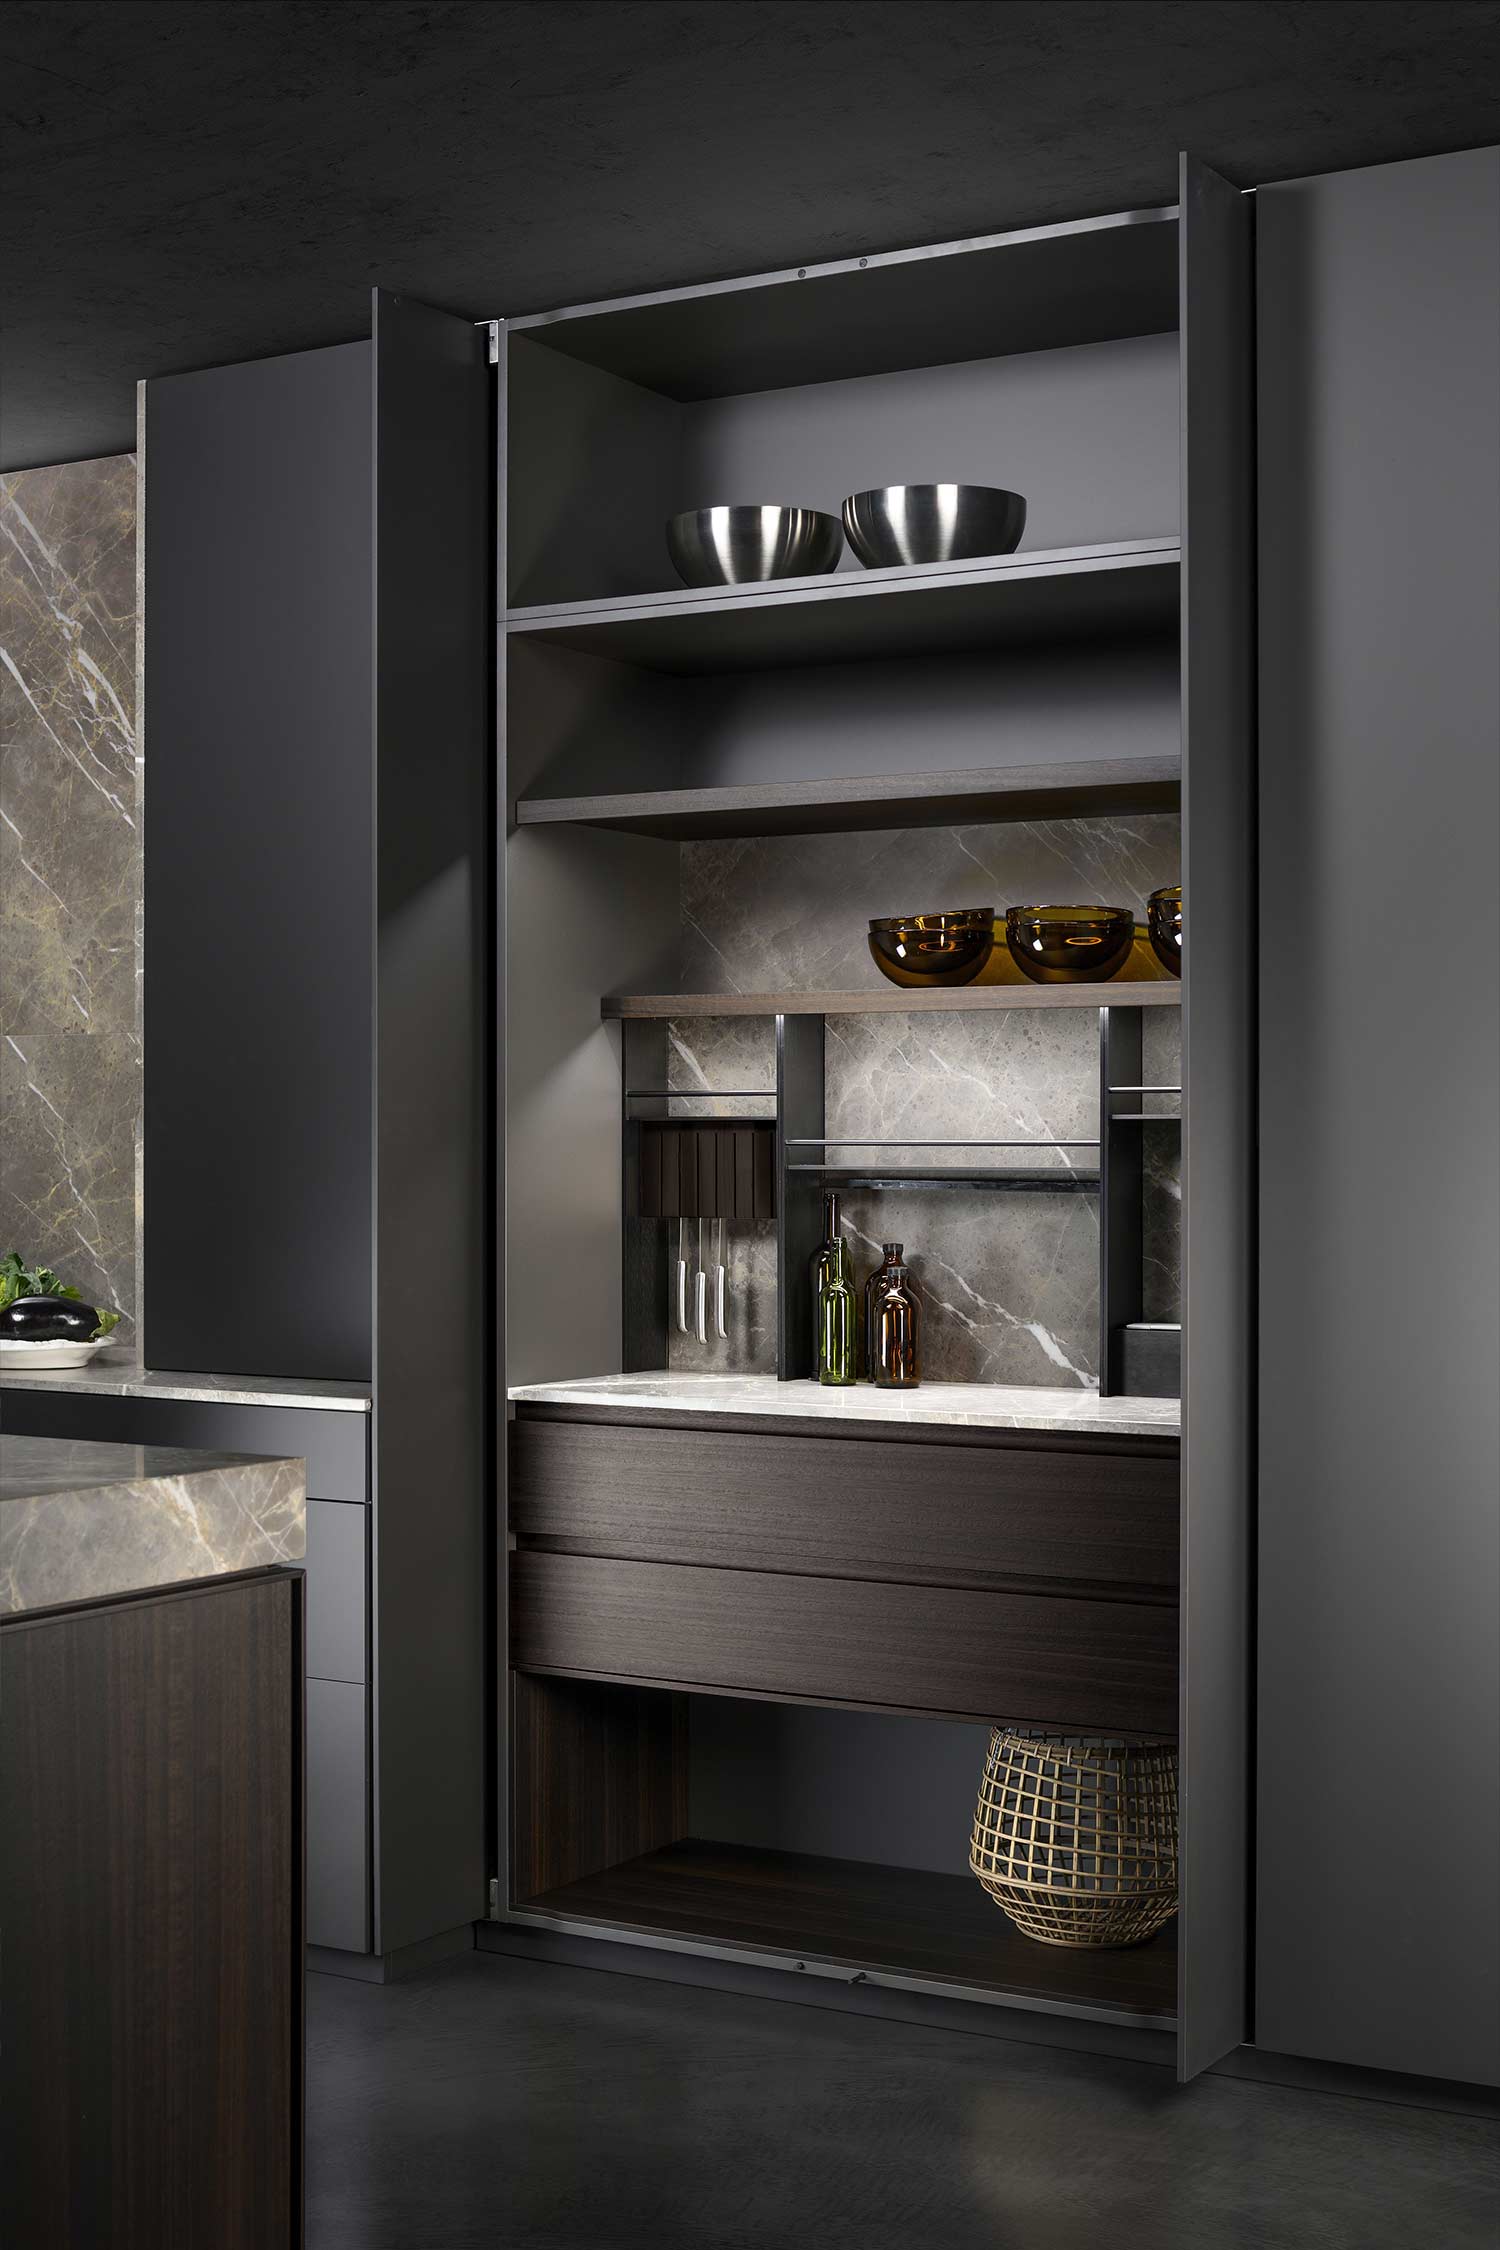 Concealed kitchen unit hidden within soft touch tall unit.